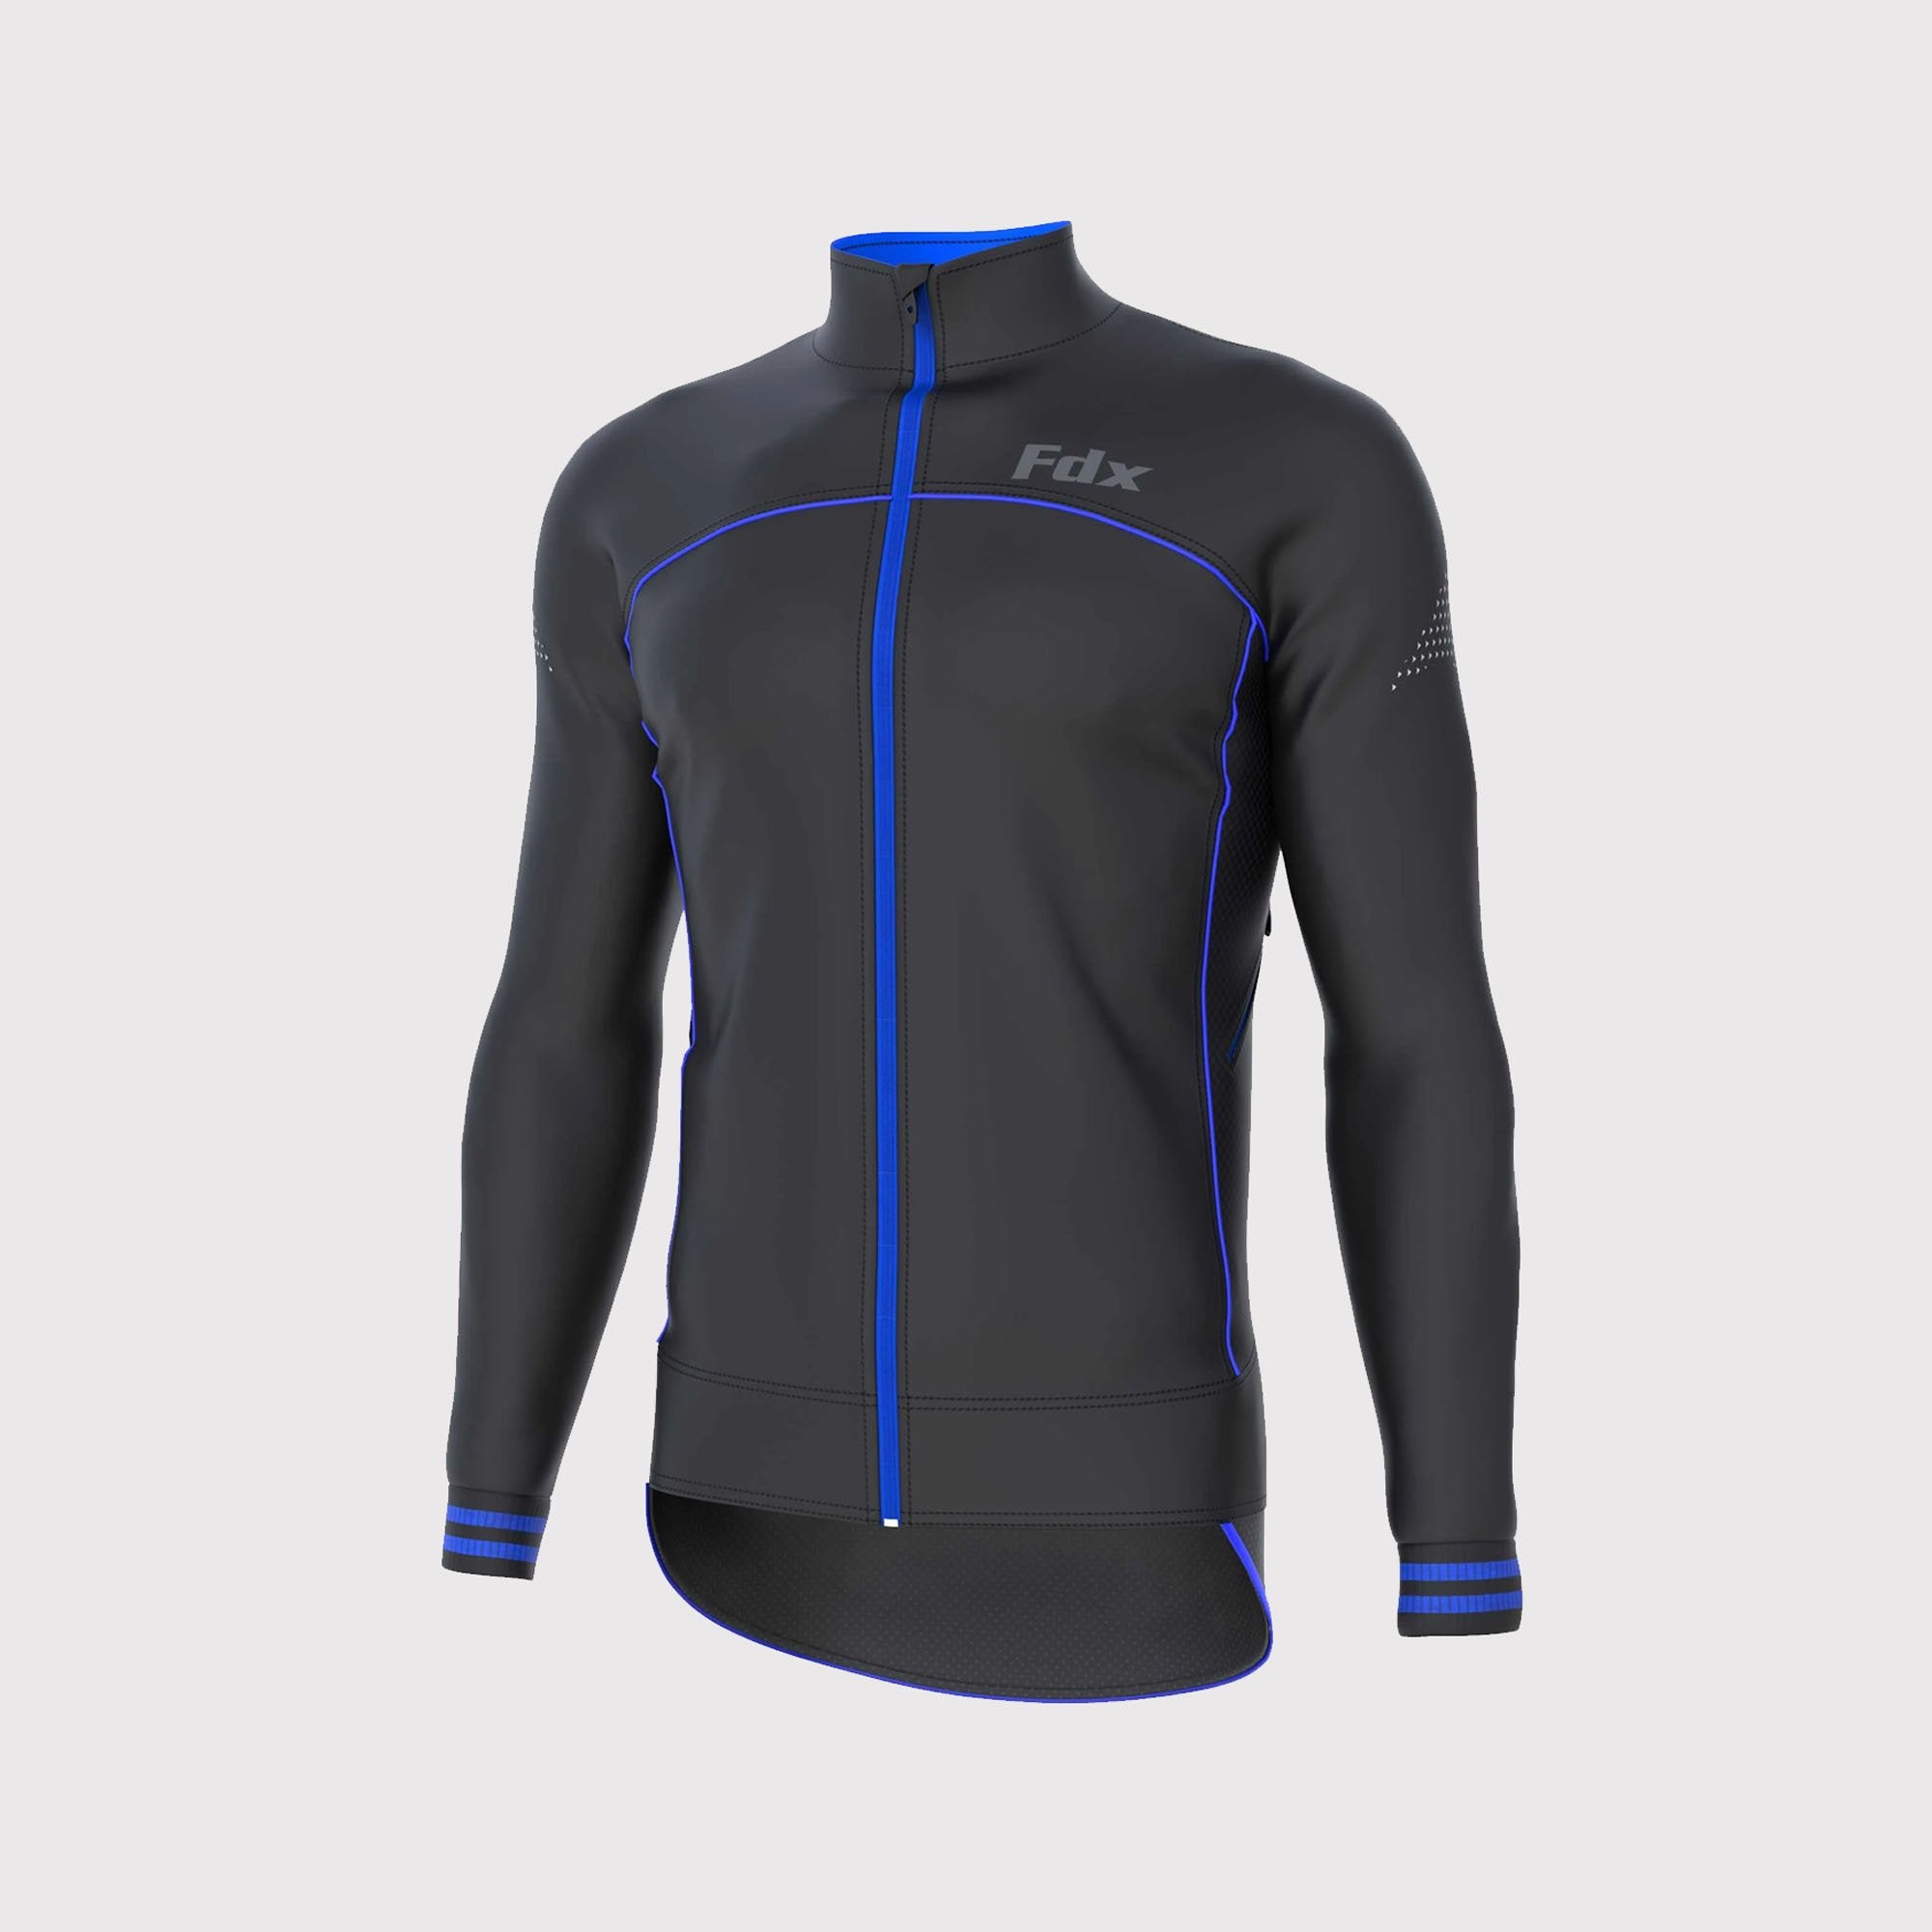 Fdx Apollux Blue Men's Windproof Cycling Jacket